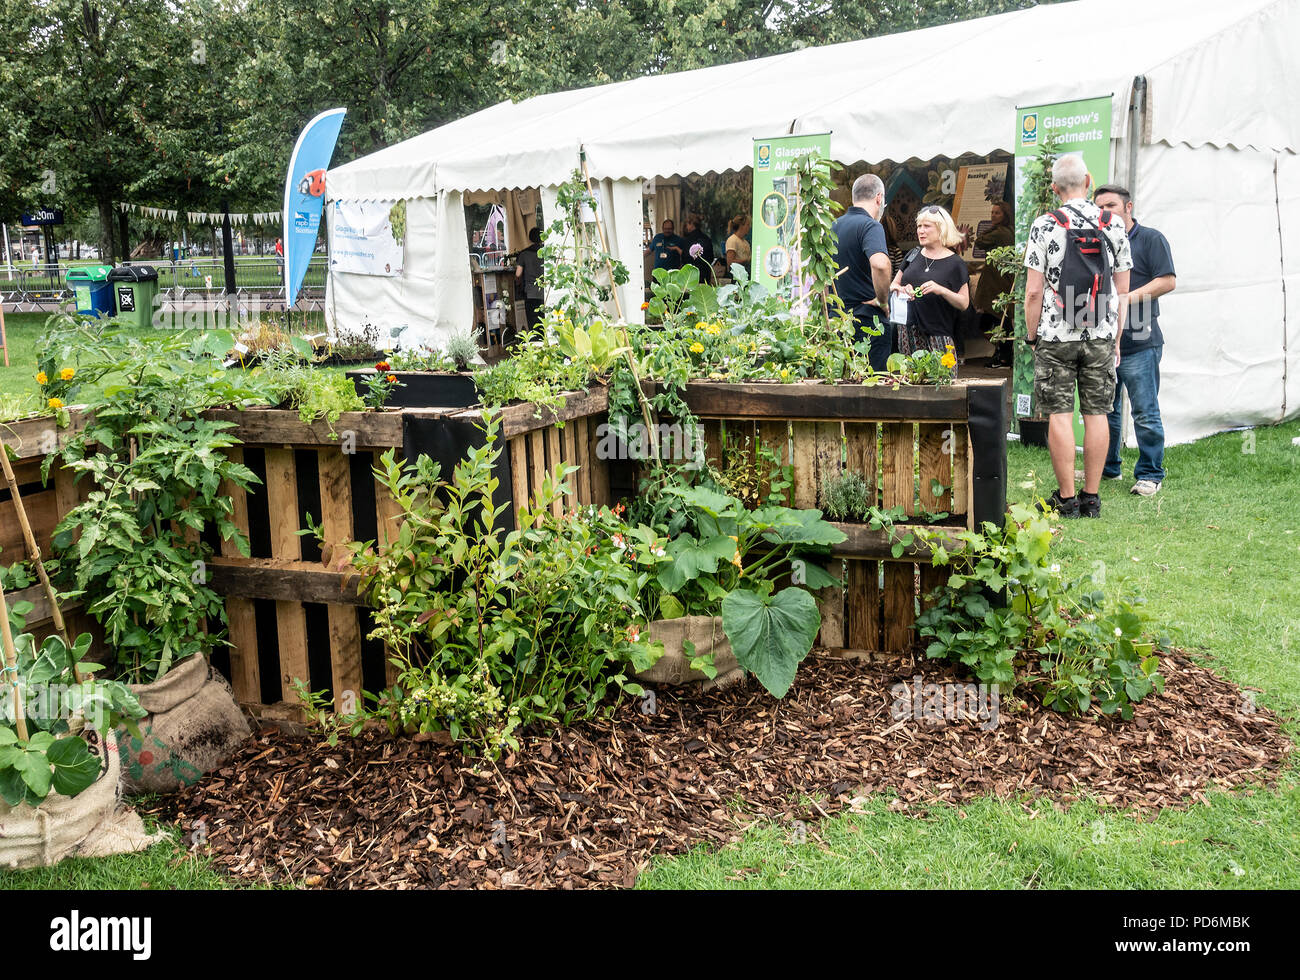 Representatives from Glasgow's allotments engaging with the public in Glasgow Green, as part of Go Live! at the green, part of Festival 2018. Stock Photo